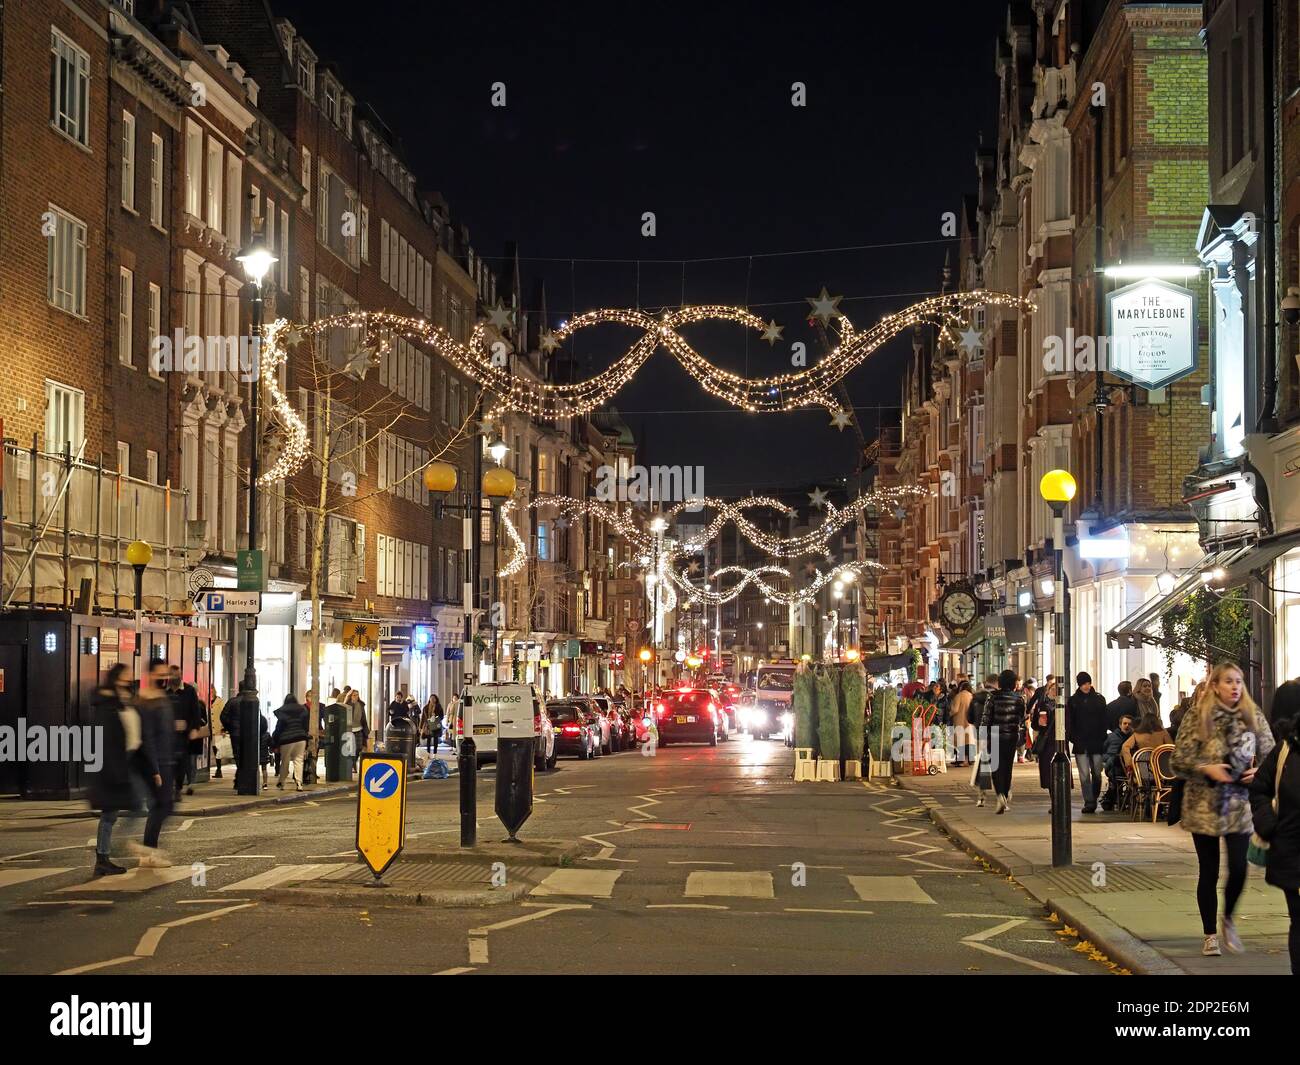 View looking up at the festive Christmas decorations at night in Marylebone High Street London 2020 Stock Photo